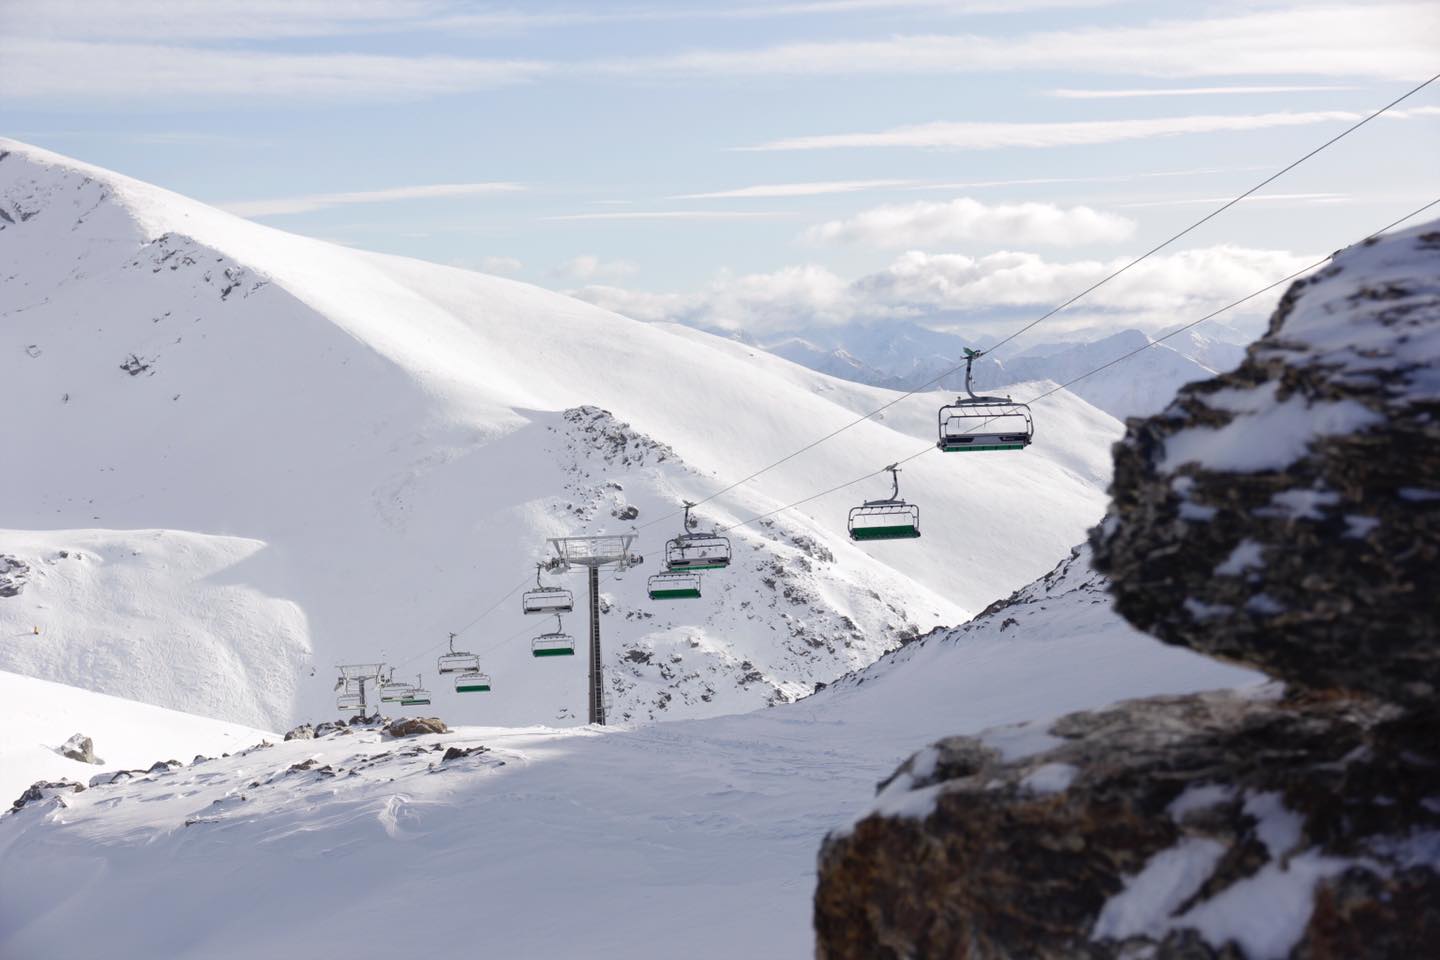 new chairlift, Remarkables